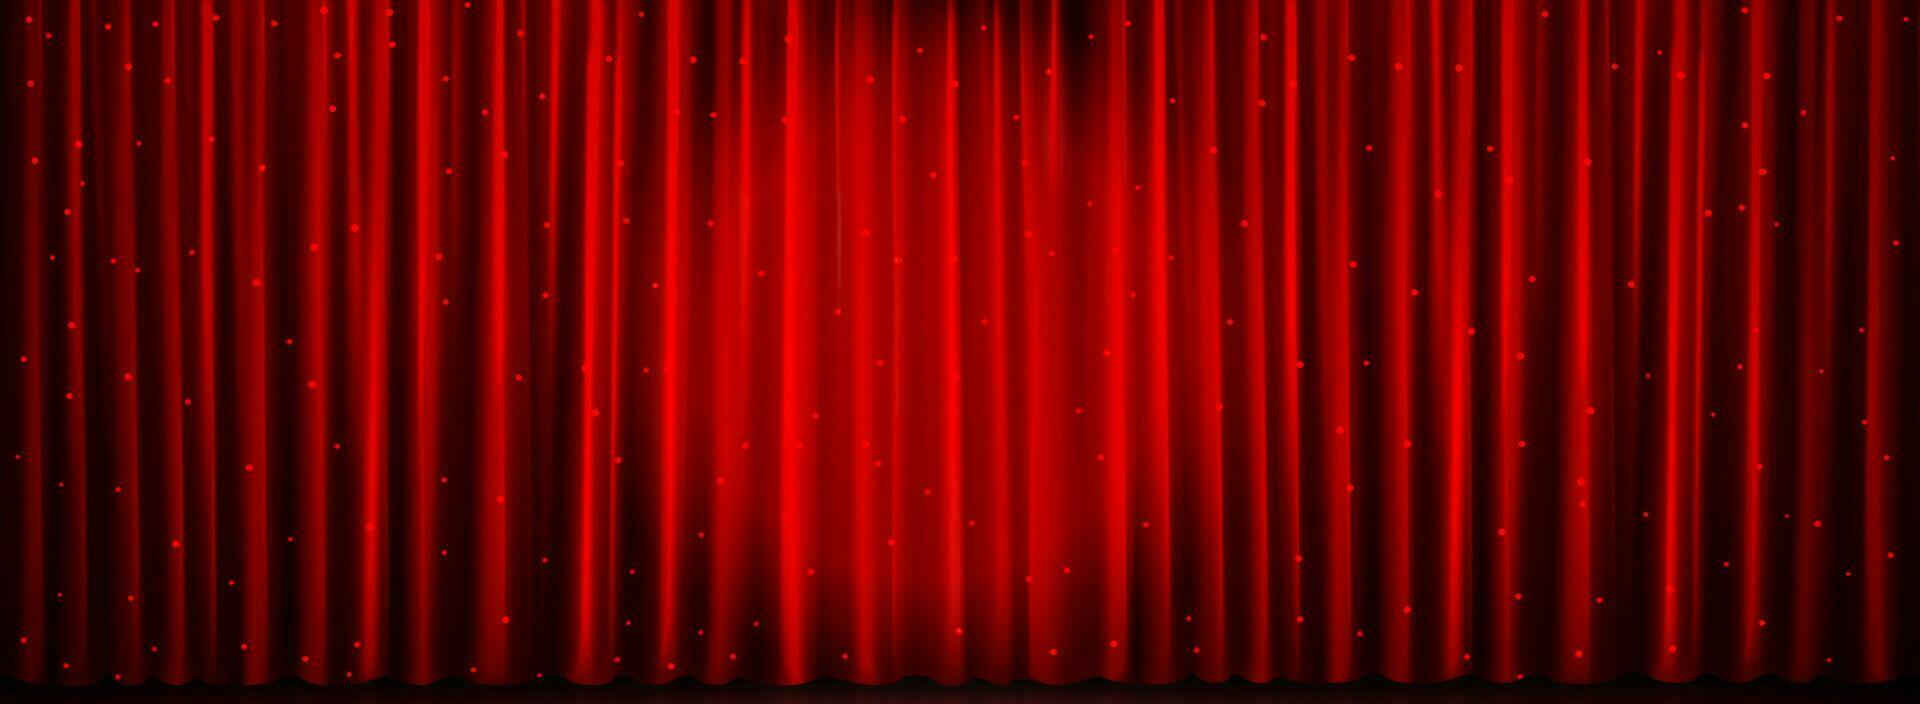 Red theater curtain background, show light vector